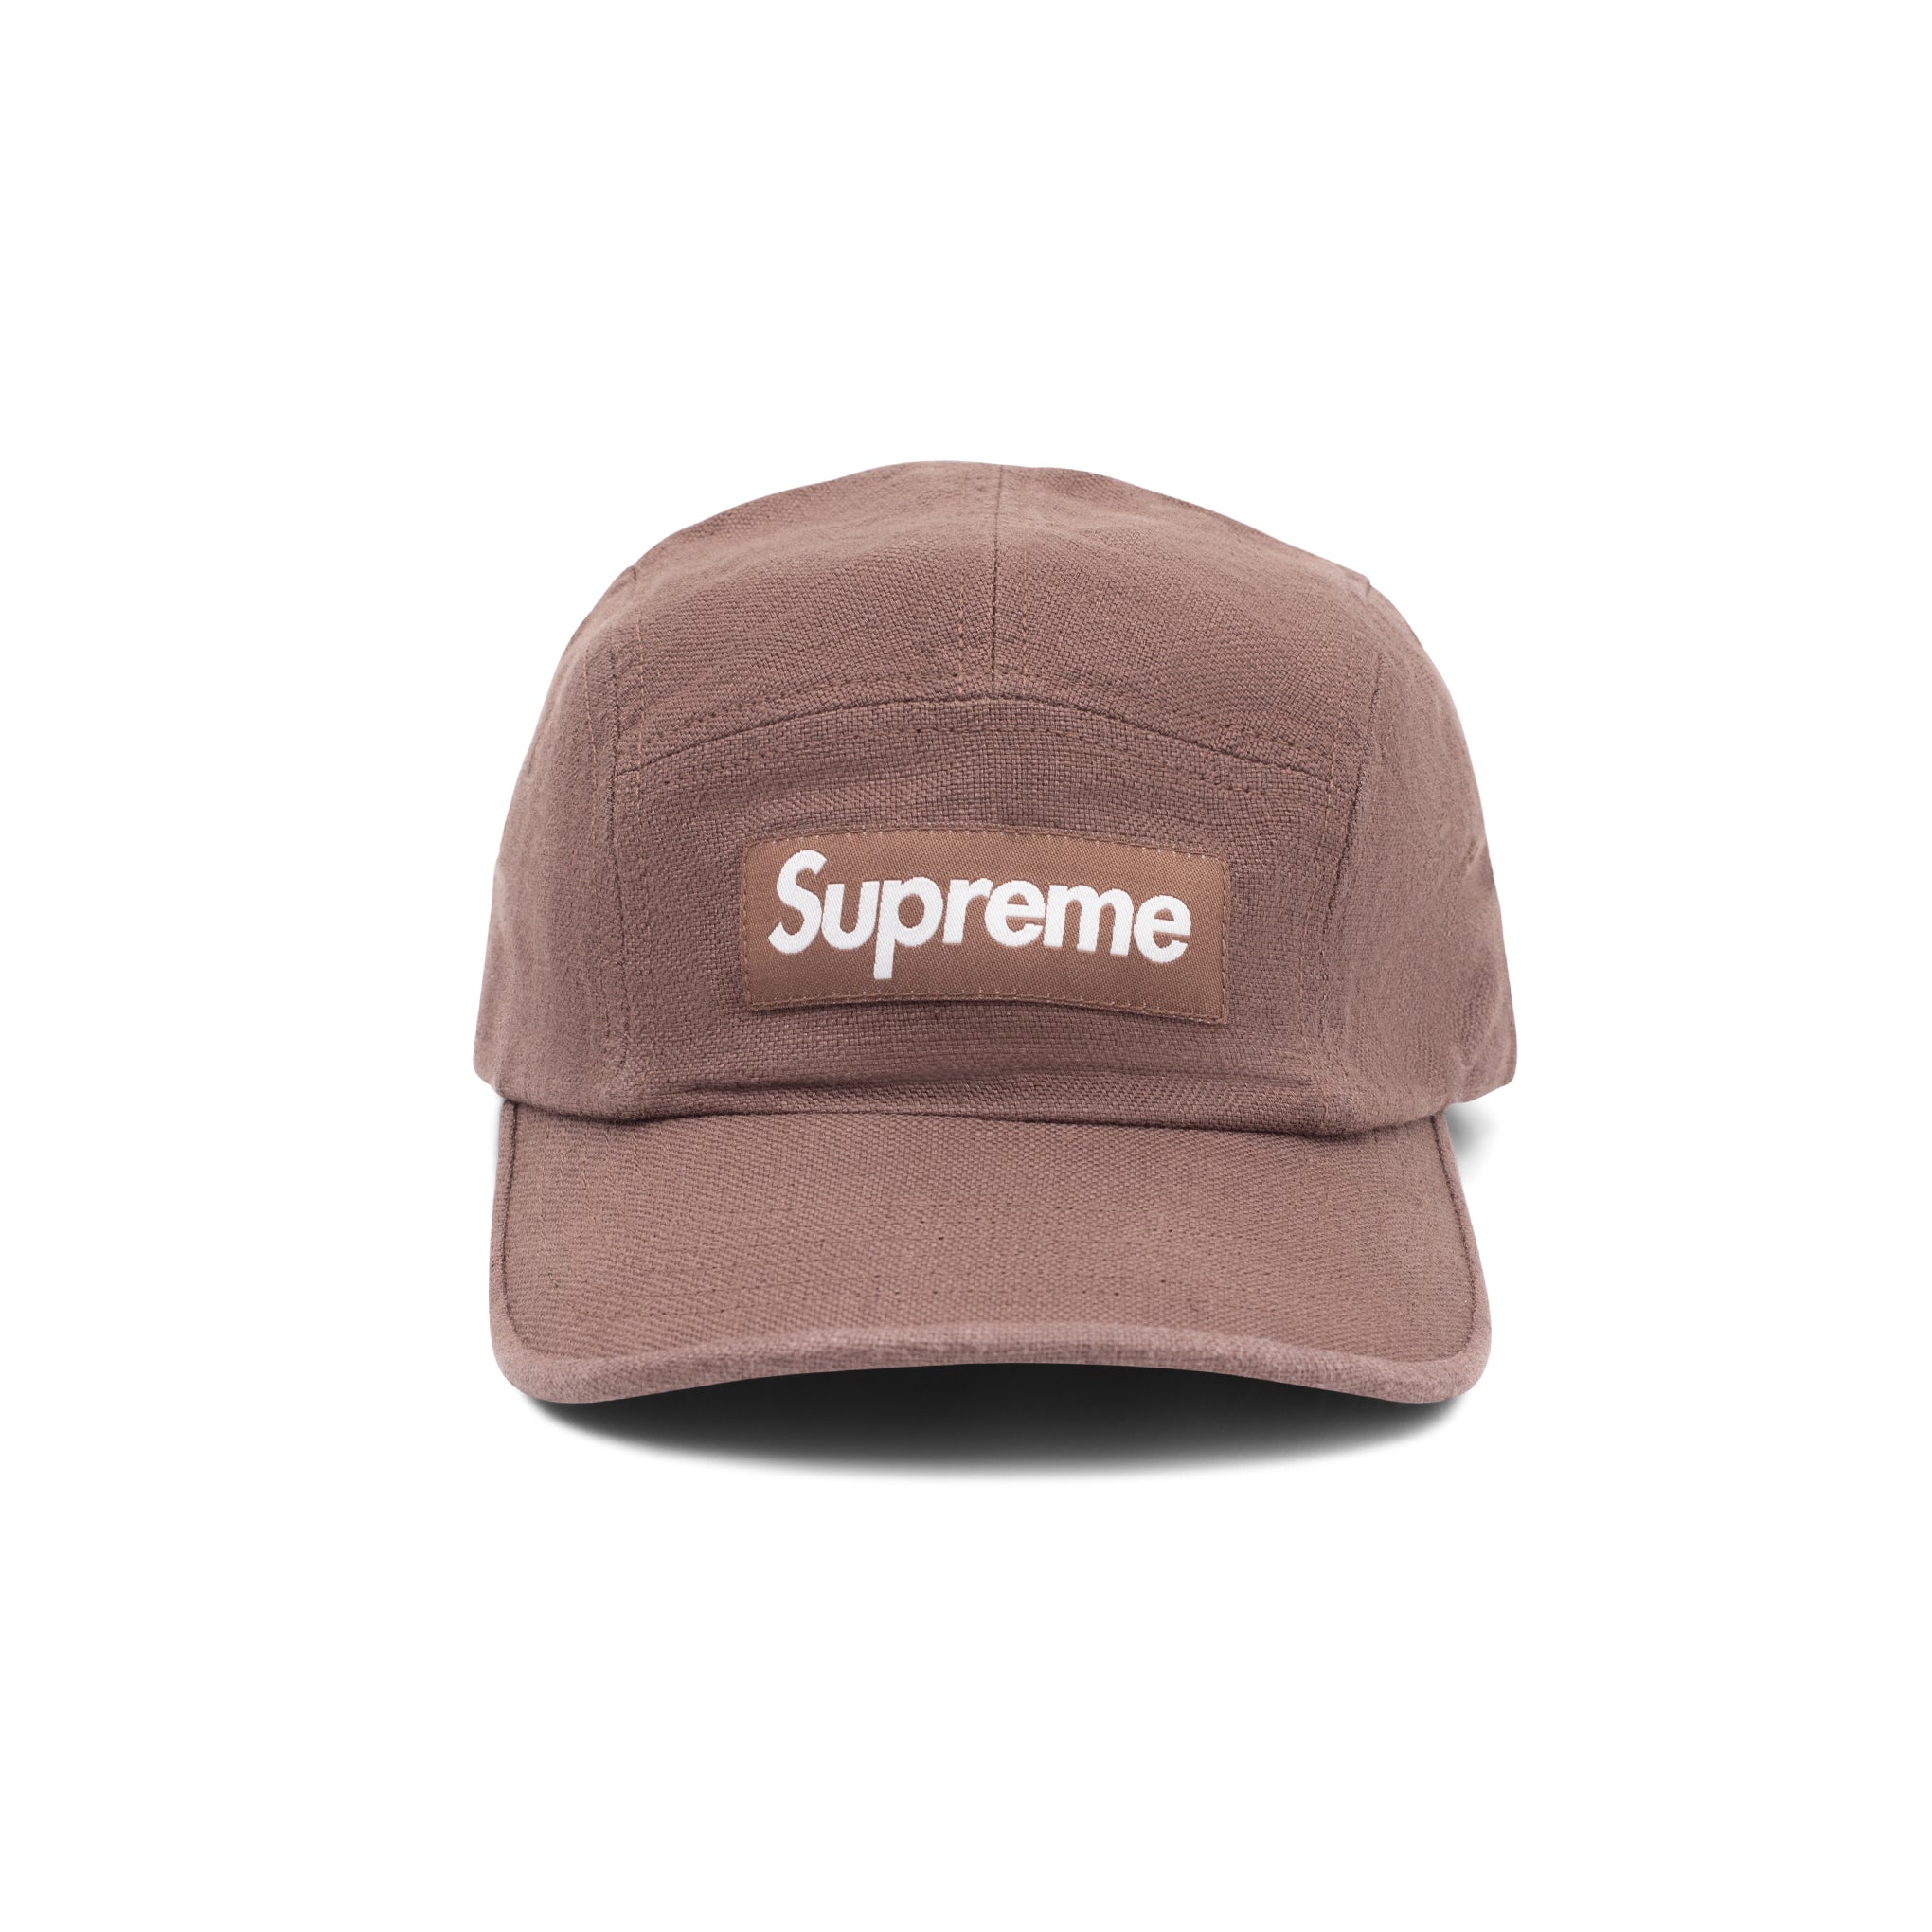 GORRA SUPREME LINEN FITTED CAMP MARRÓN